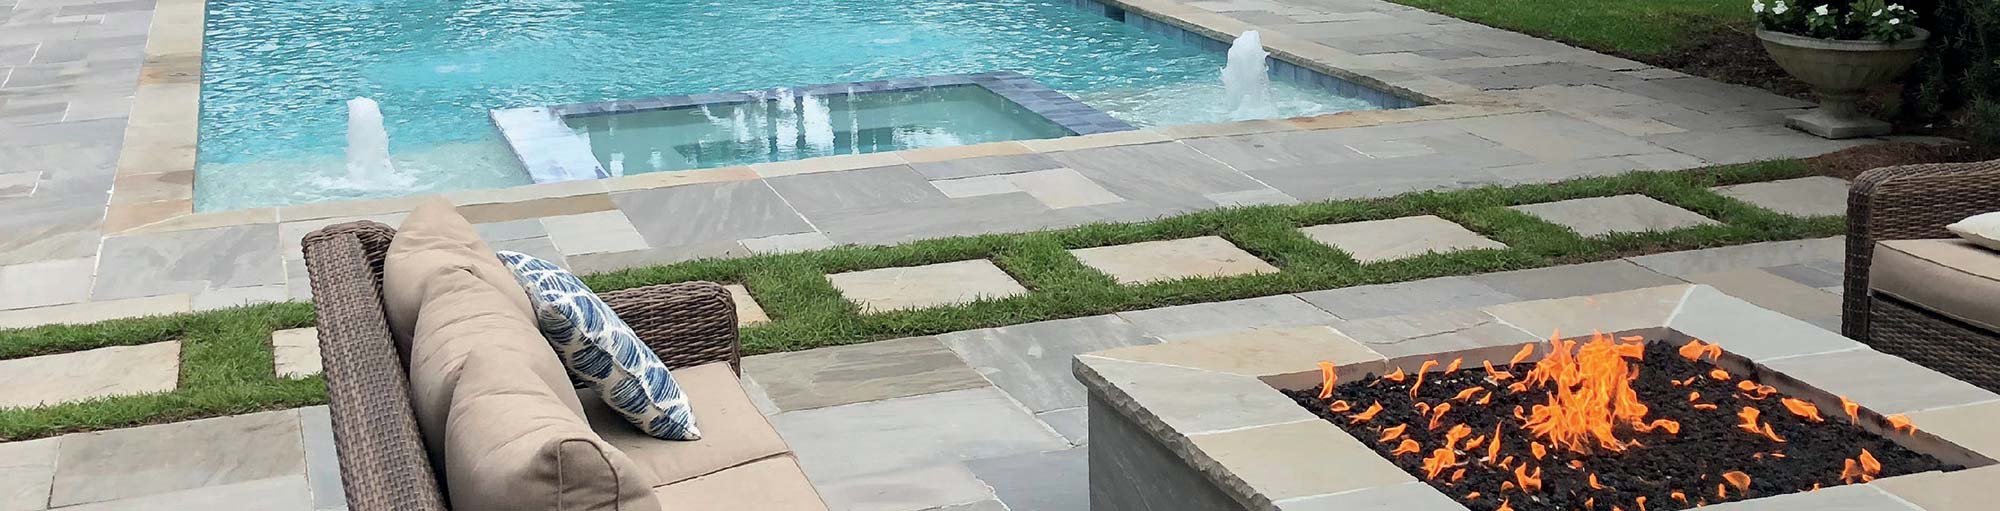 The Best Pool Paving To Use For Your Pool Area